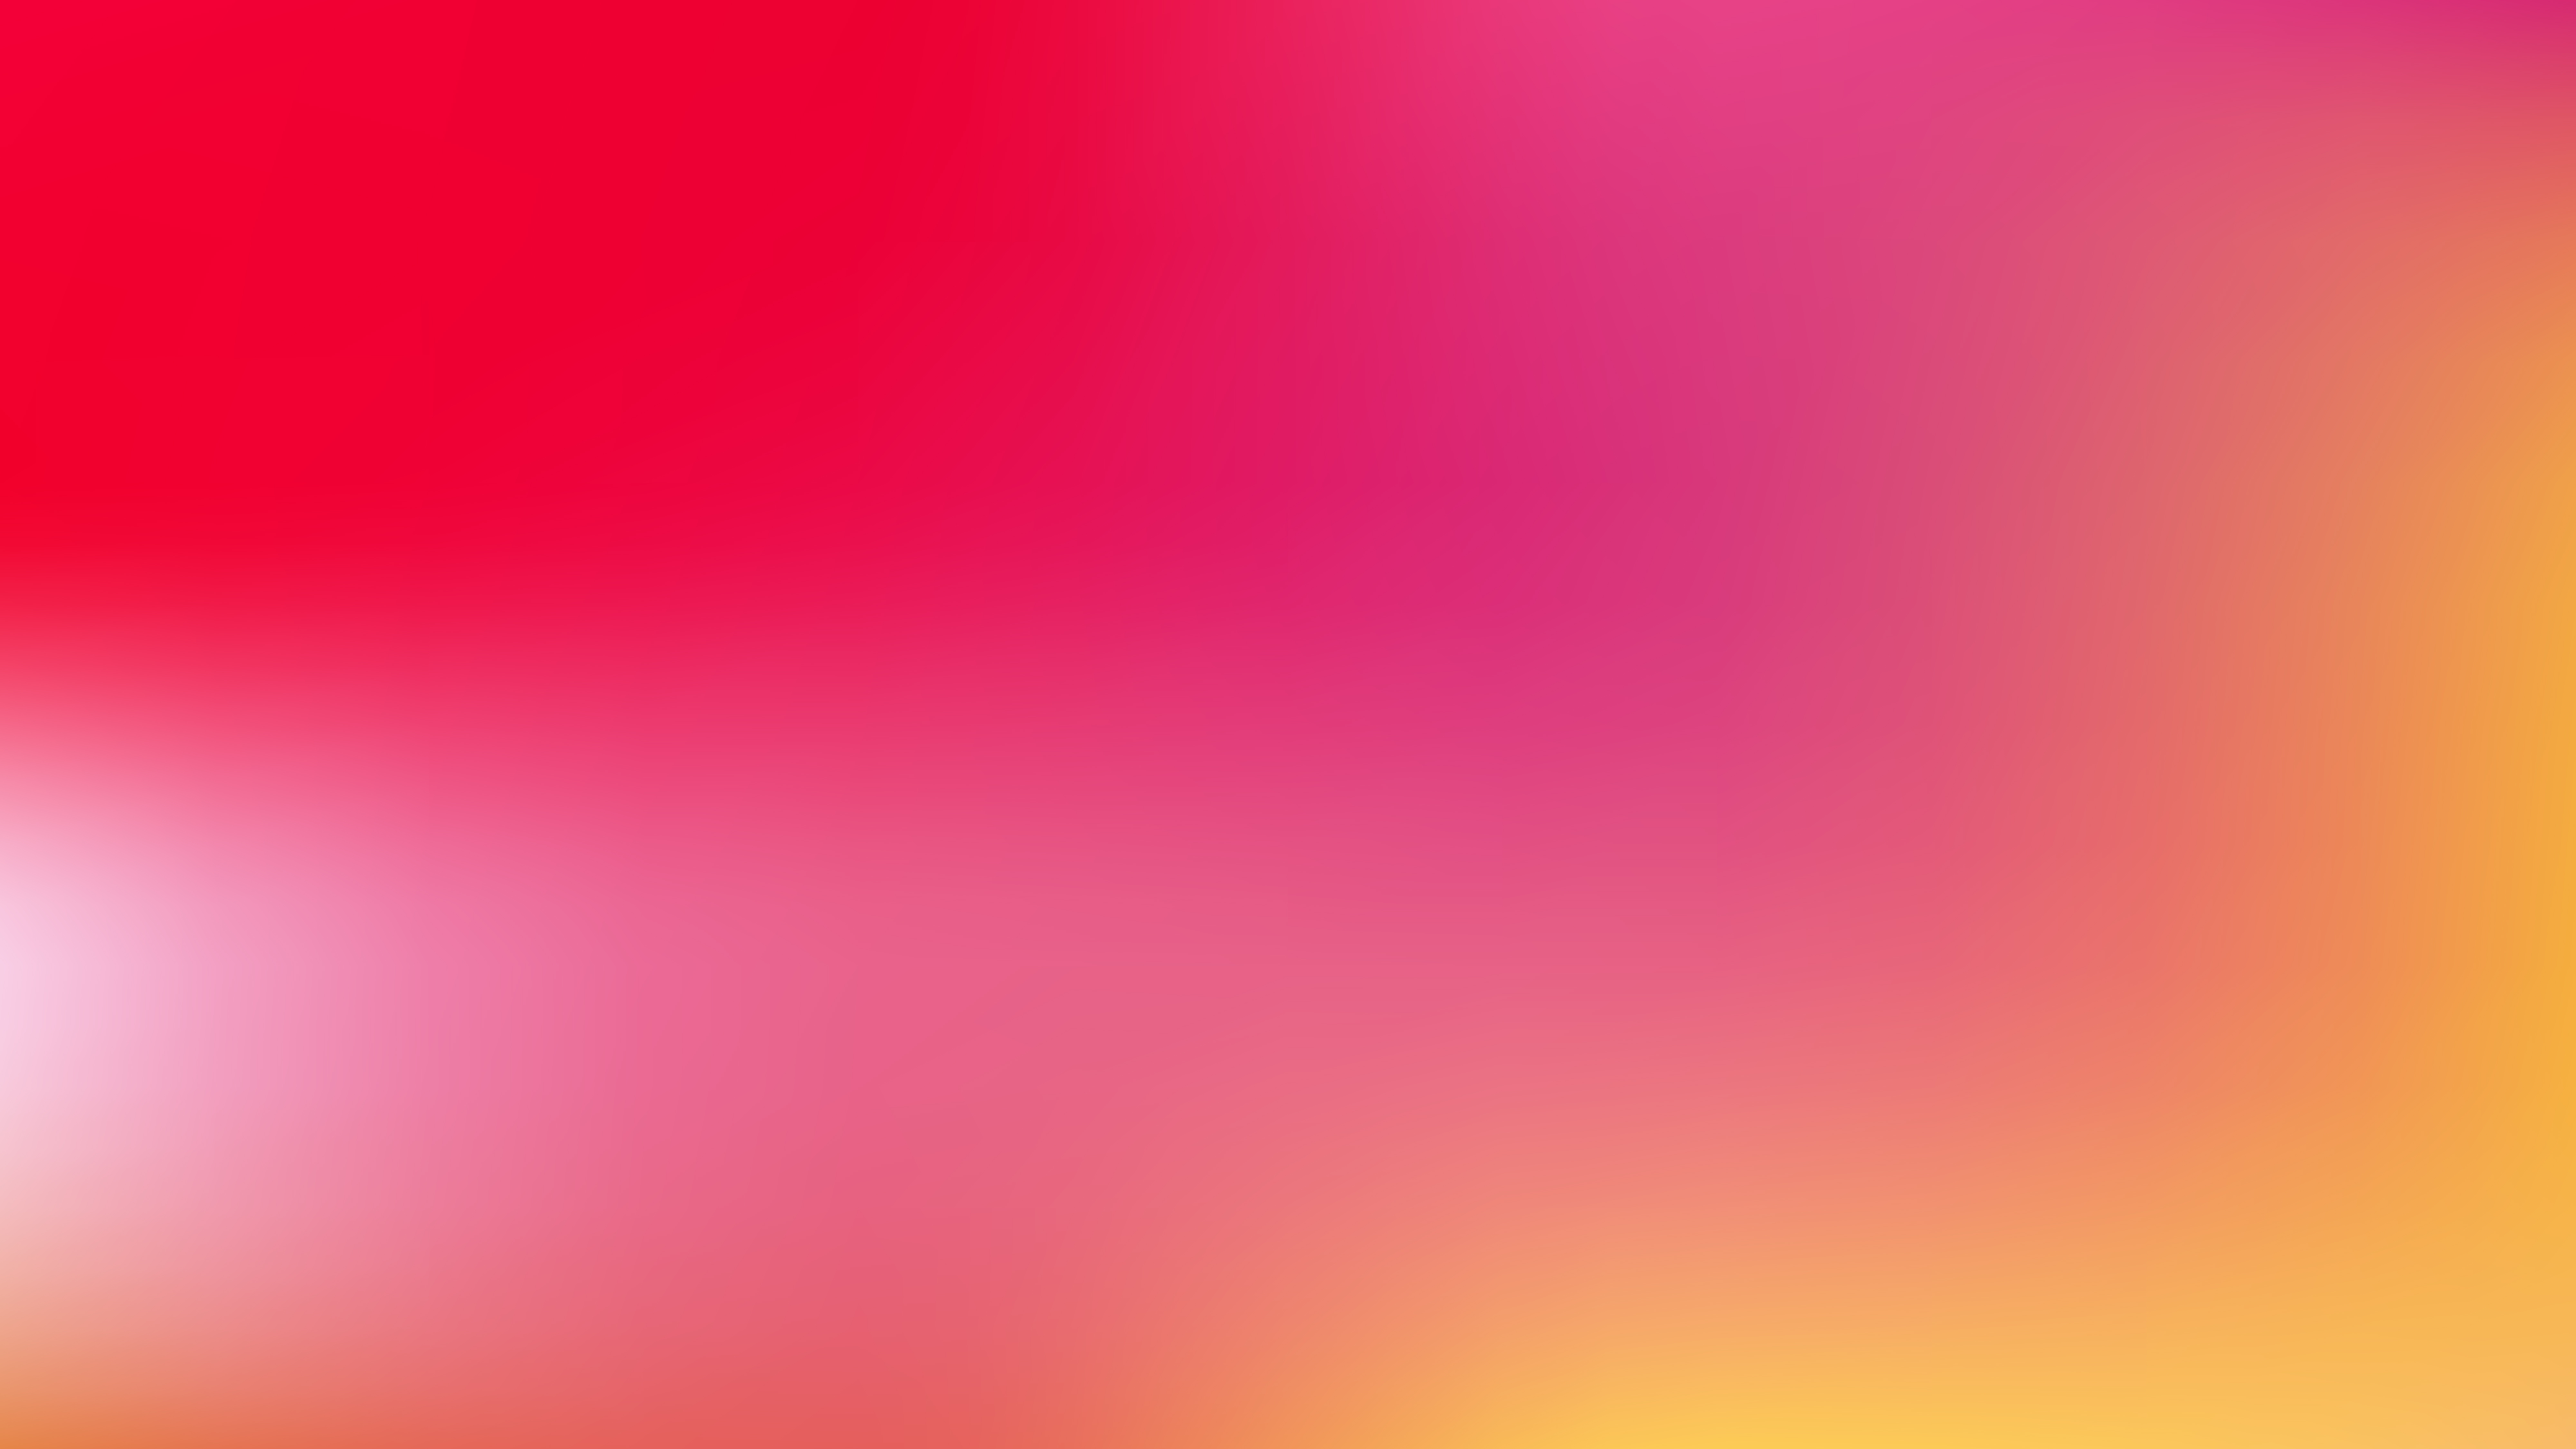 Free Pink and Yellow Blurry Background Image